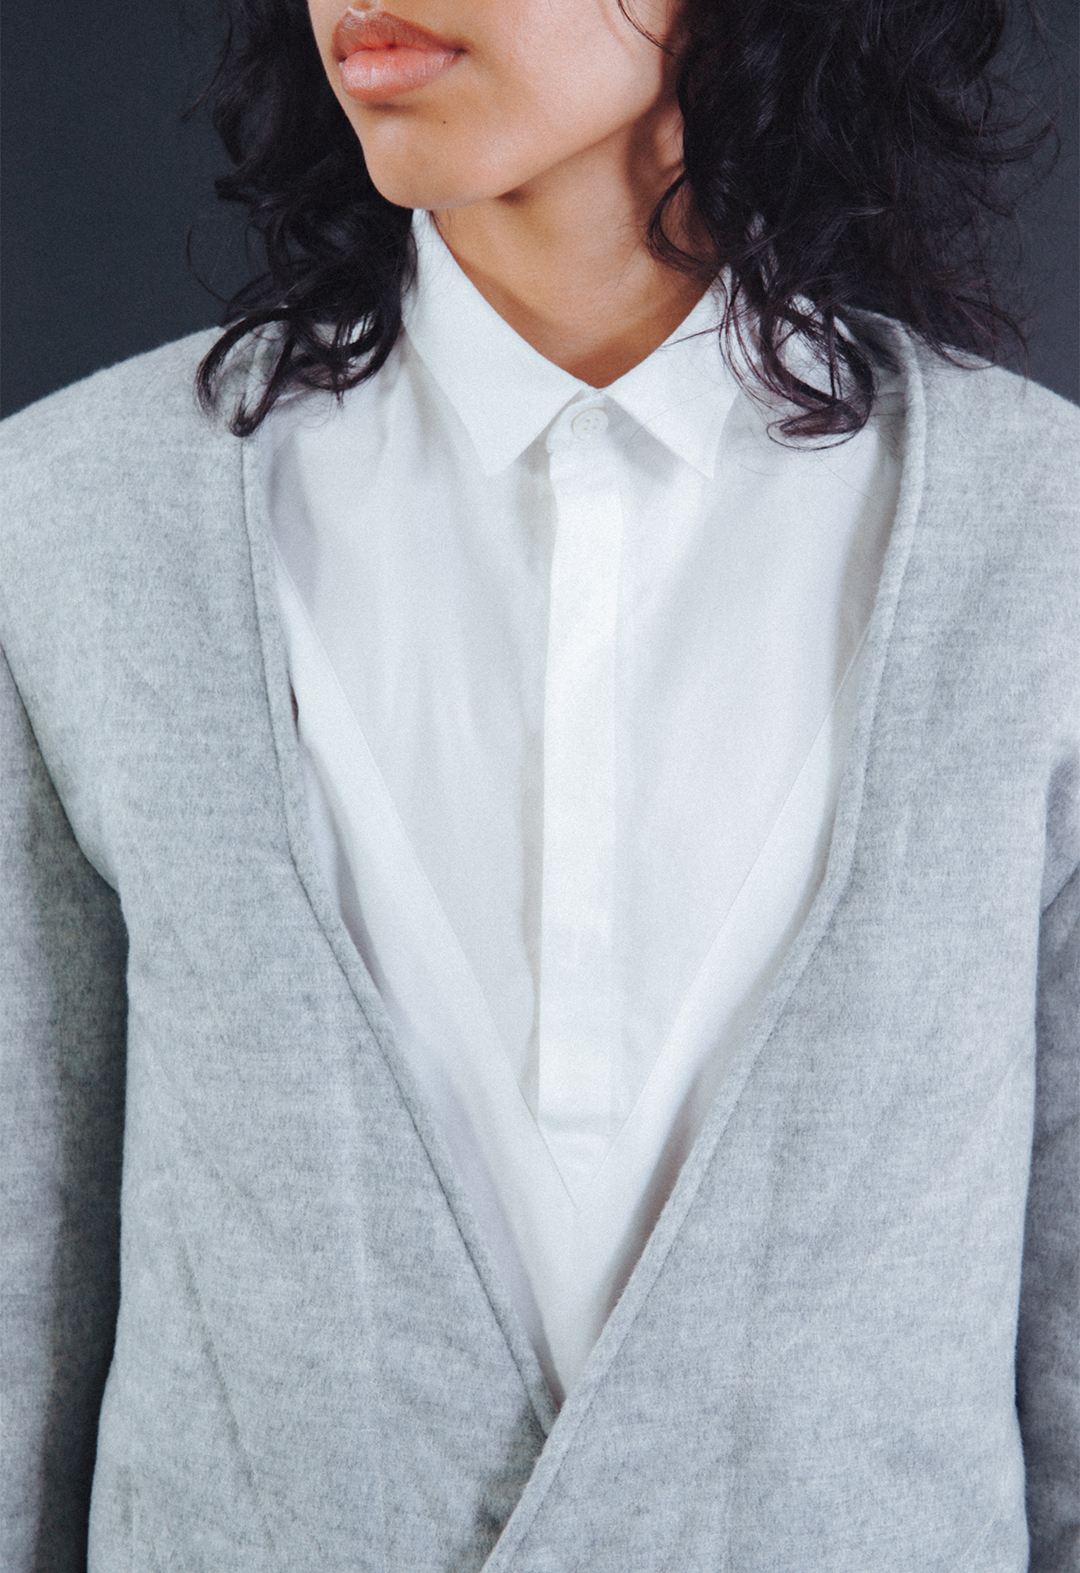 Front-close-up photo of the model, Aria Puga, wearing a grey wool quilted jacket and a white cotton tunic shirt. The neckline opening of the jacket corresponds with the geometric hidden half-placket opening of the shirt. The background is black.